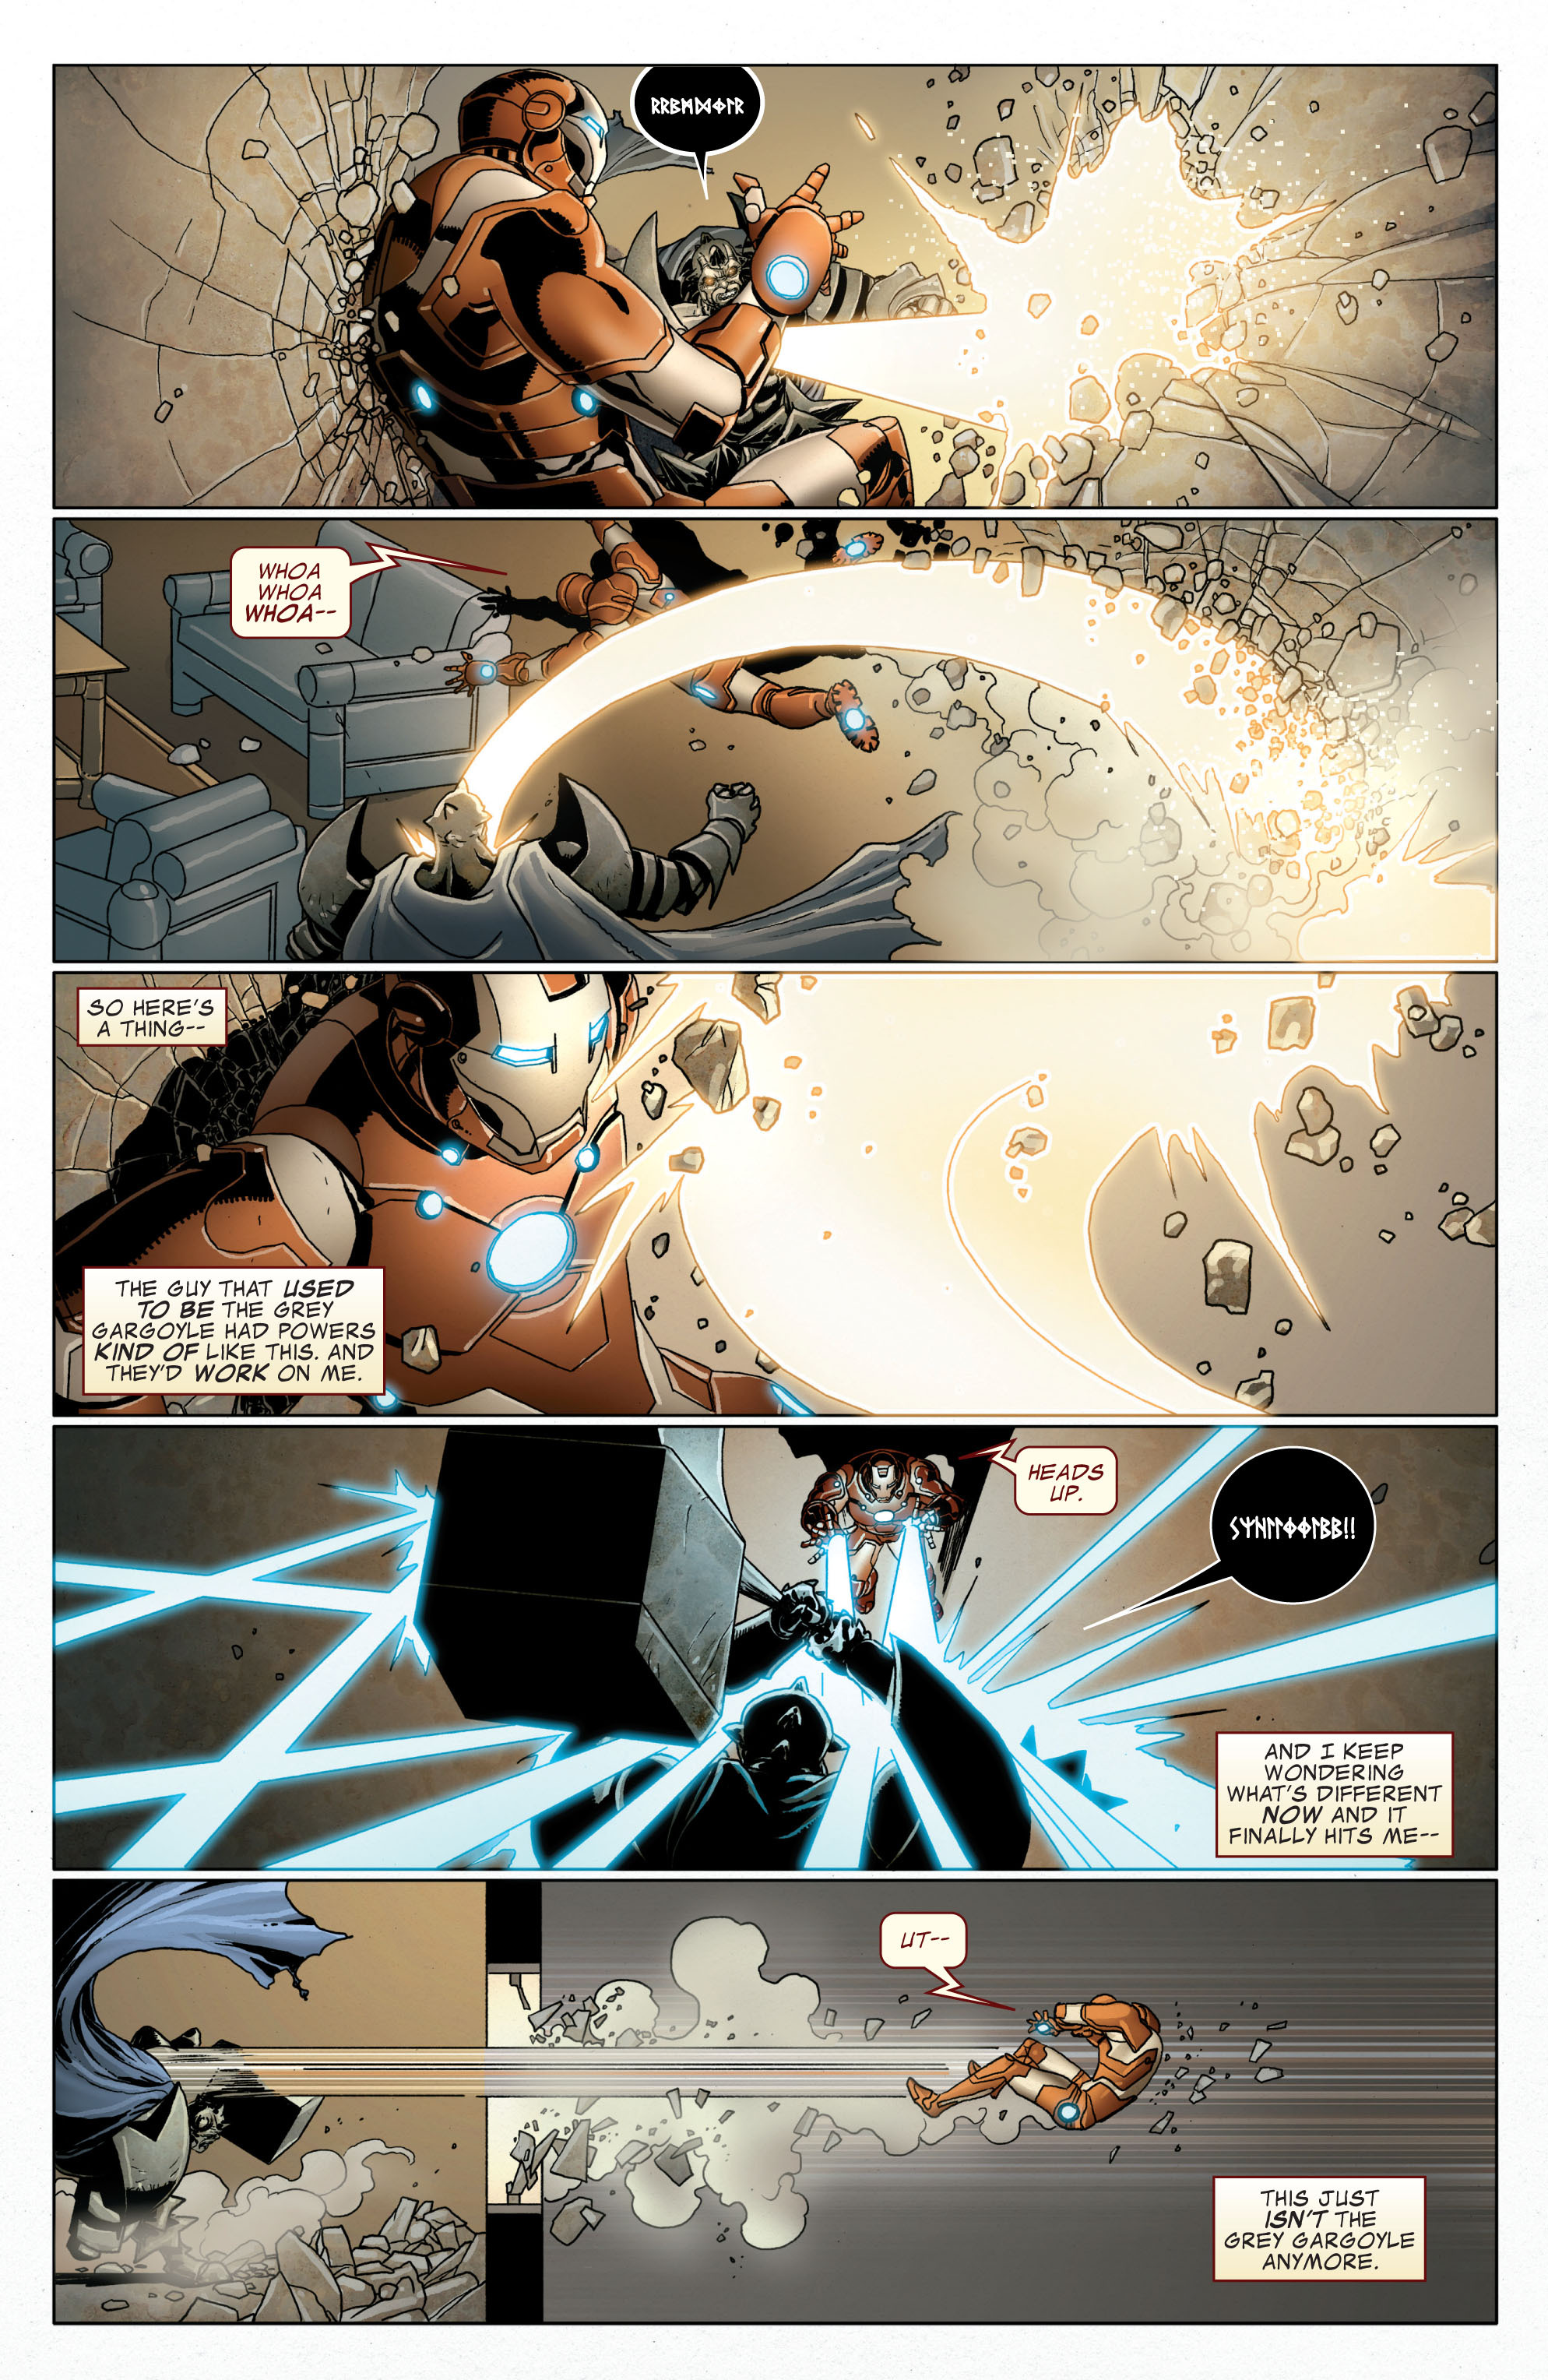 Invincible Iron Man (2008) 504 Page 16